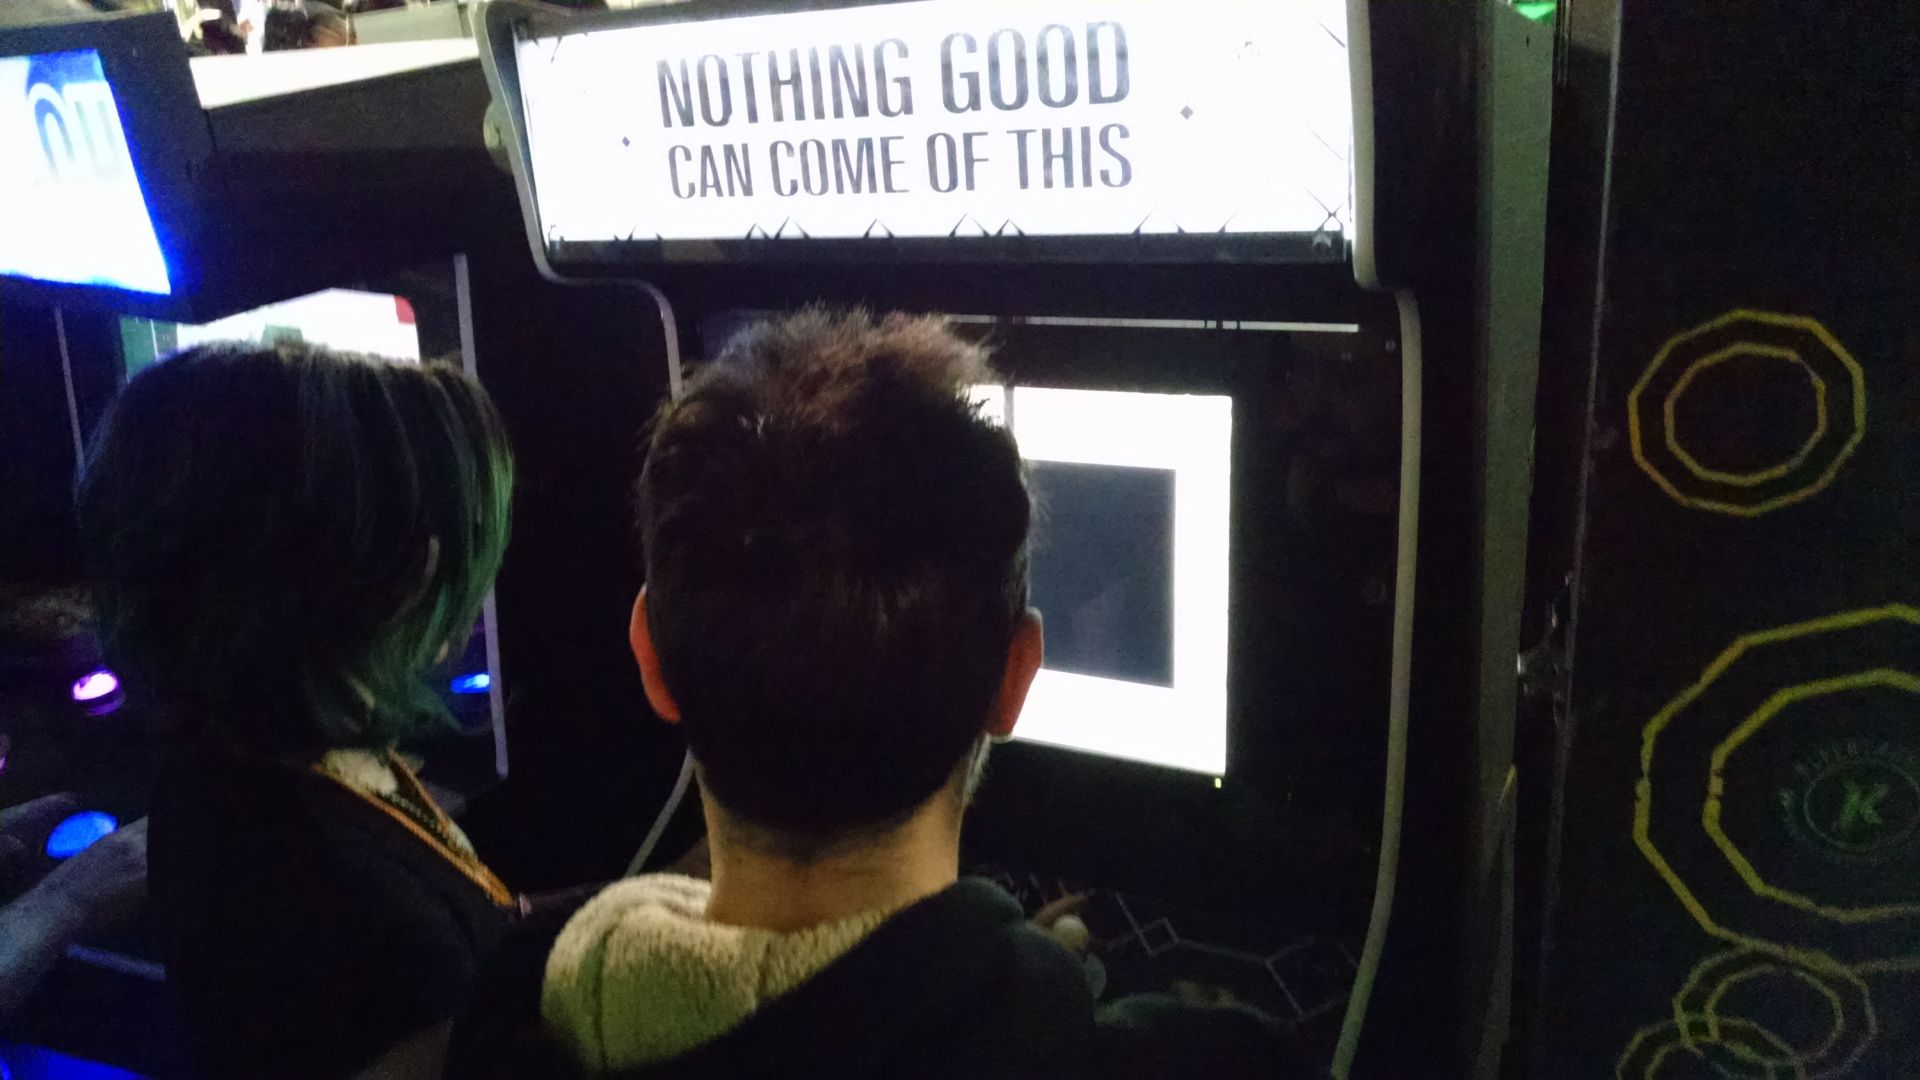 Two people playing on the Nothing Good Can Come Of This arcade machine